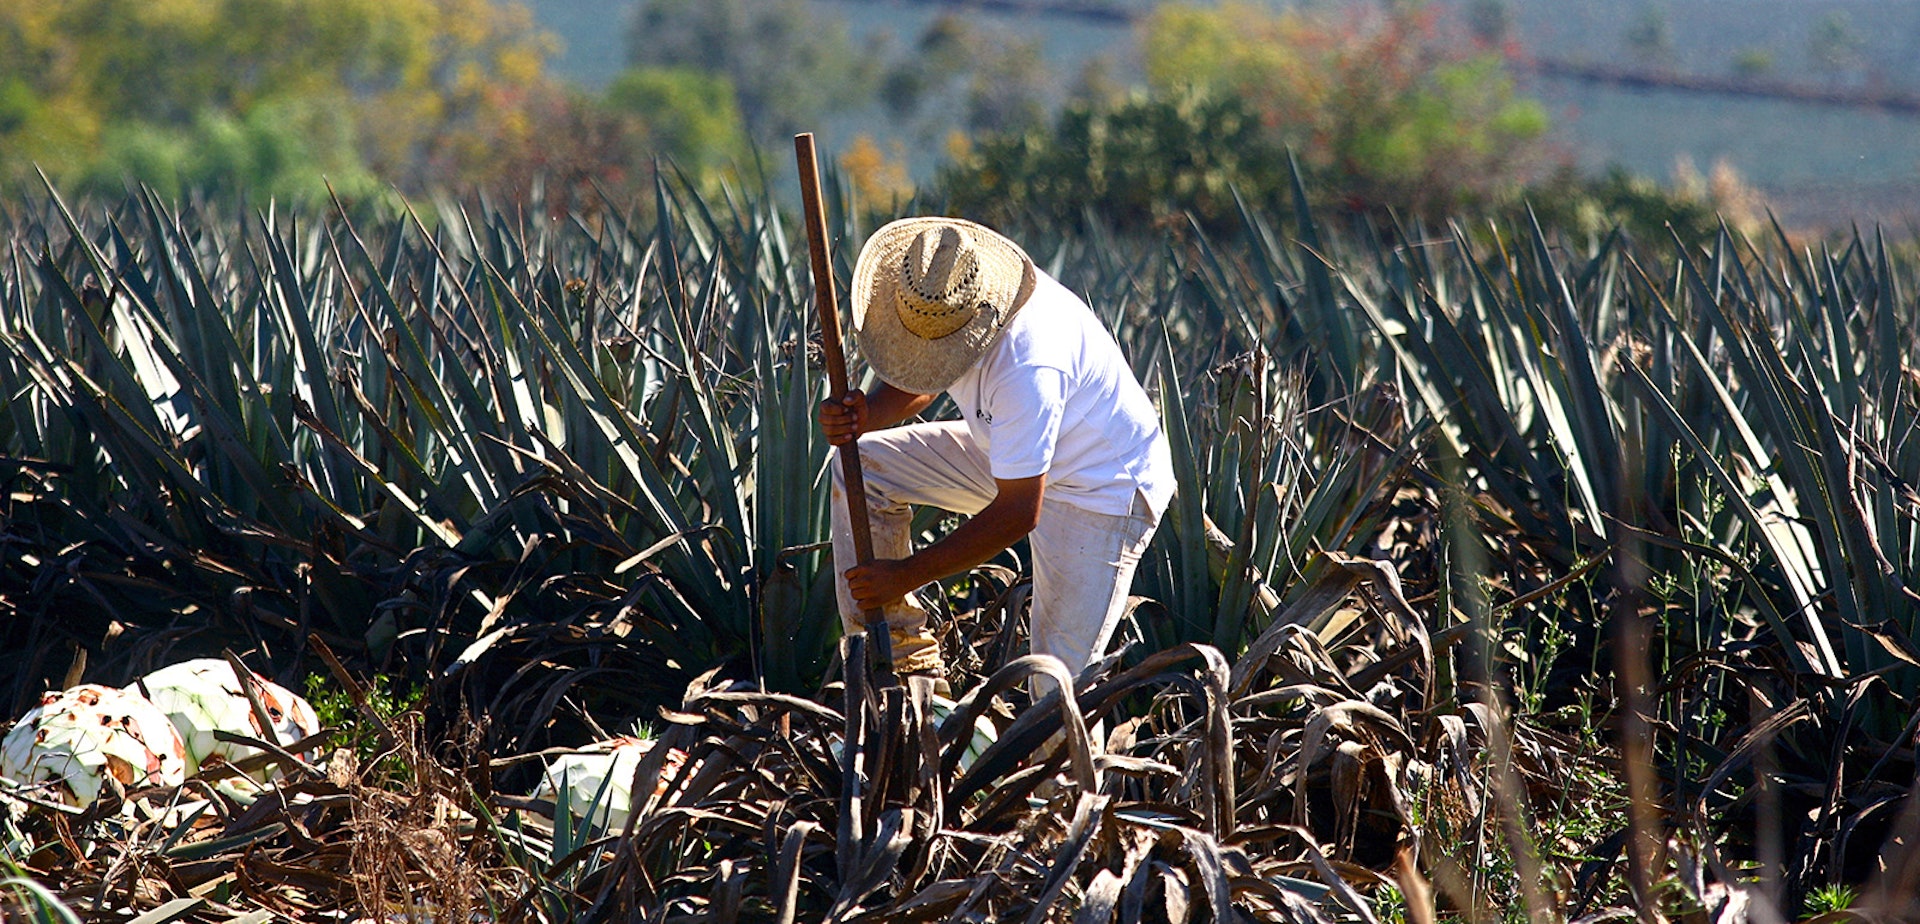 Features - A farmer harvests a blue agave plant for